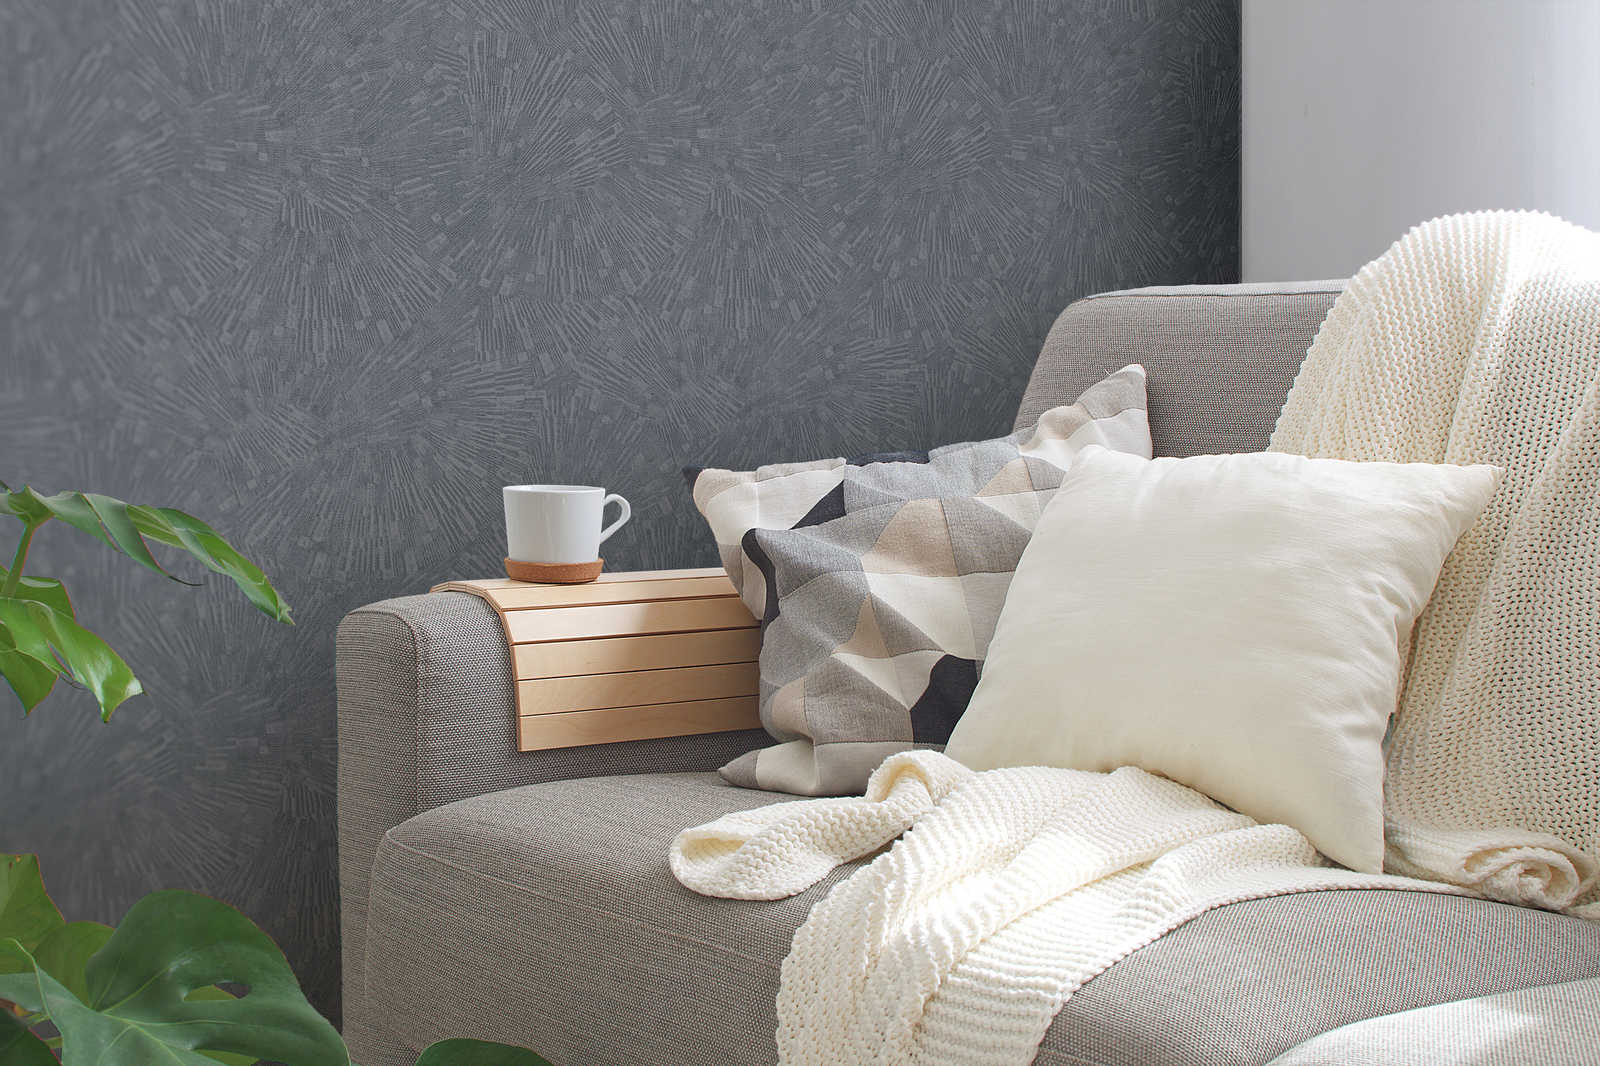             Non-woven wallpaper with graphic pattern in retro style - grey
        